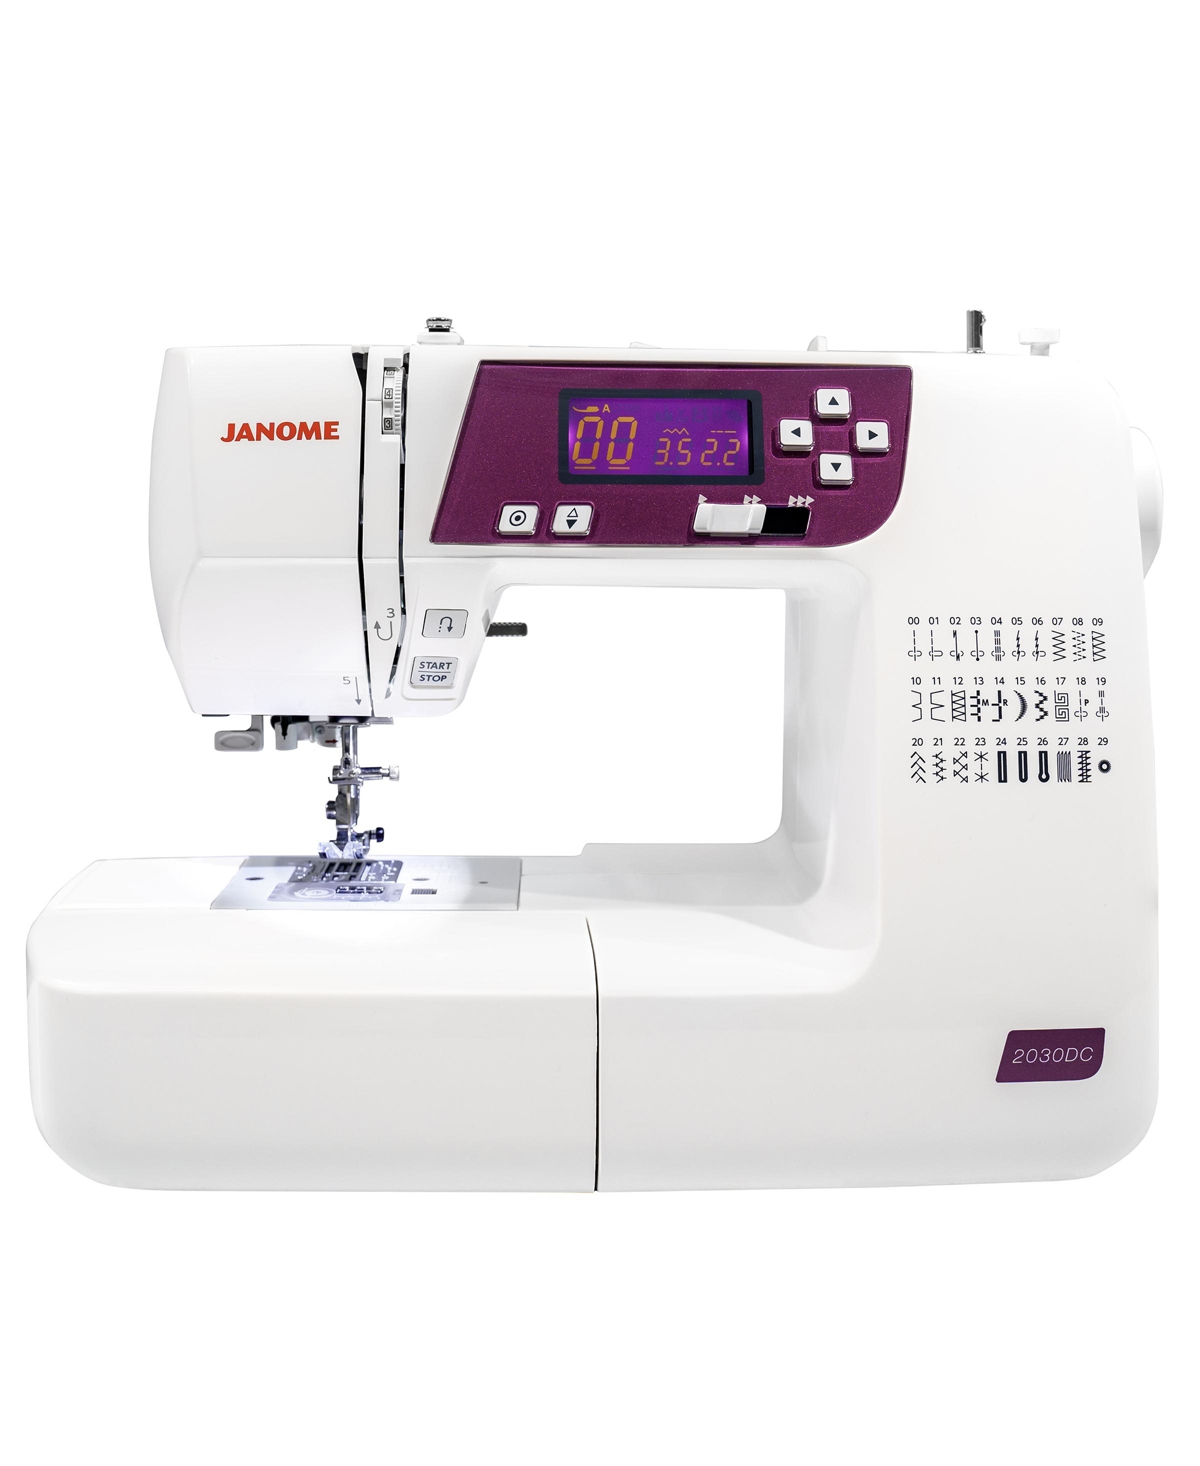 2030DC-g New Home Computerized Sewing Machine - White